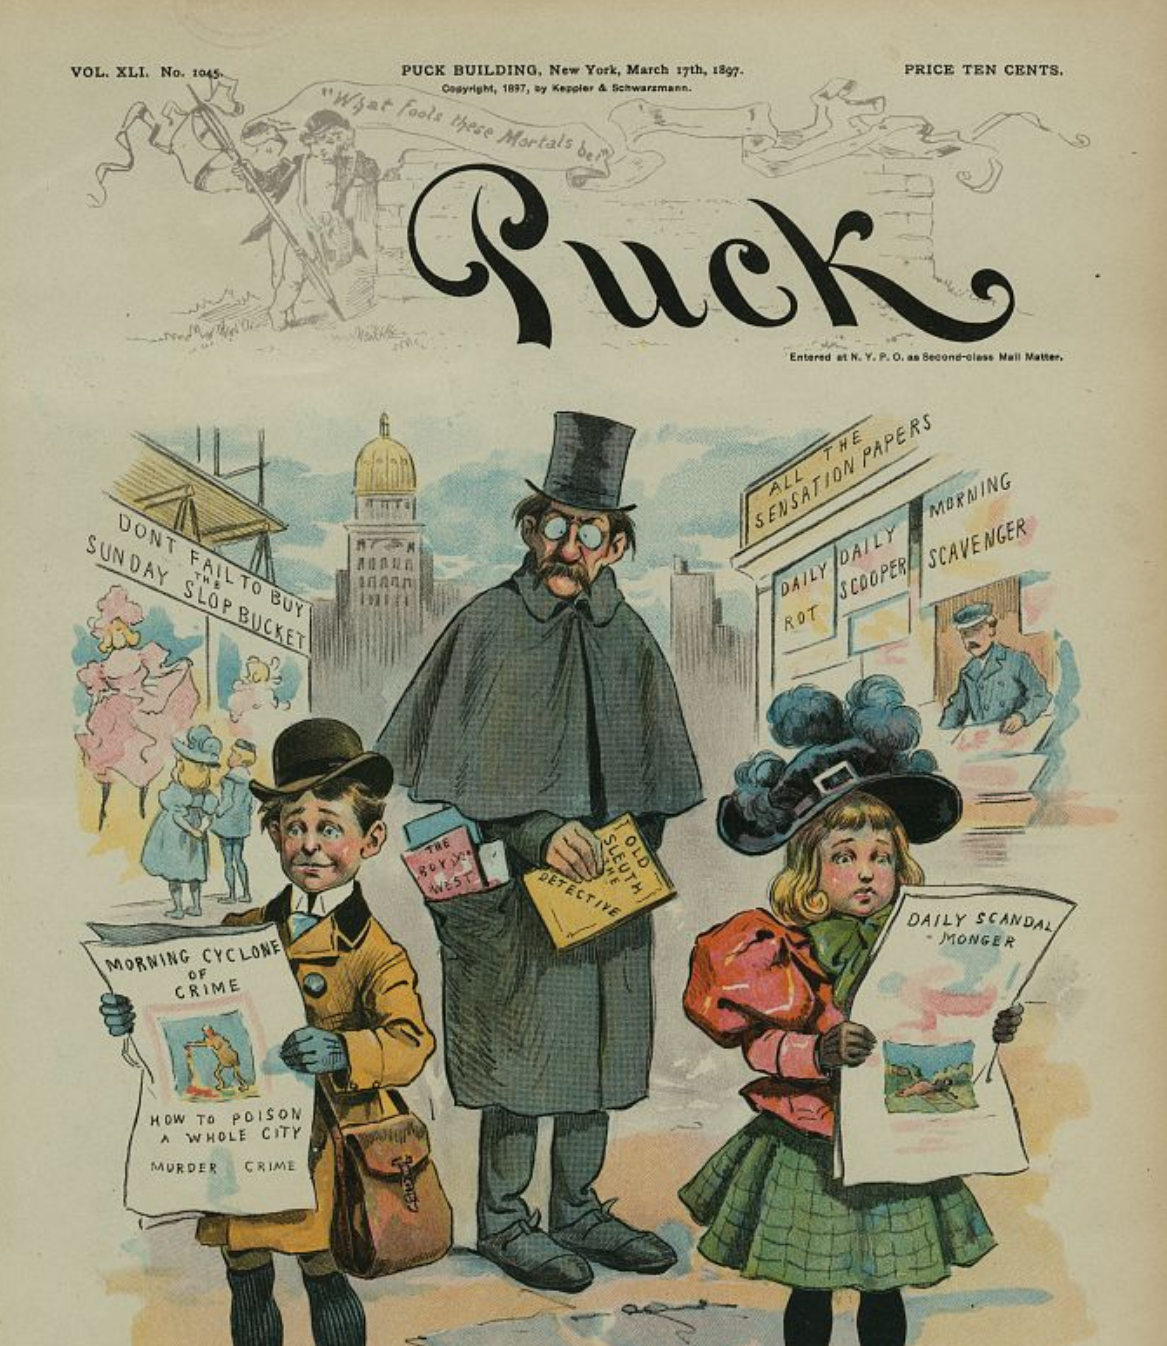 Old sleuth-style reporter replaced by sensational news in an 1897 illustration.